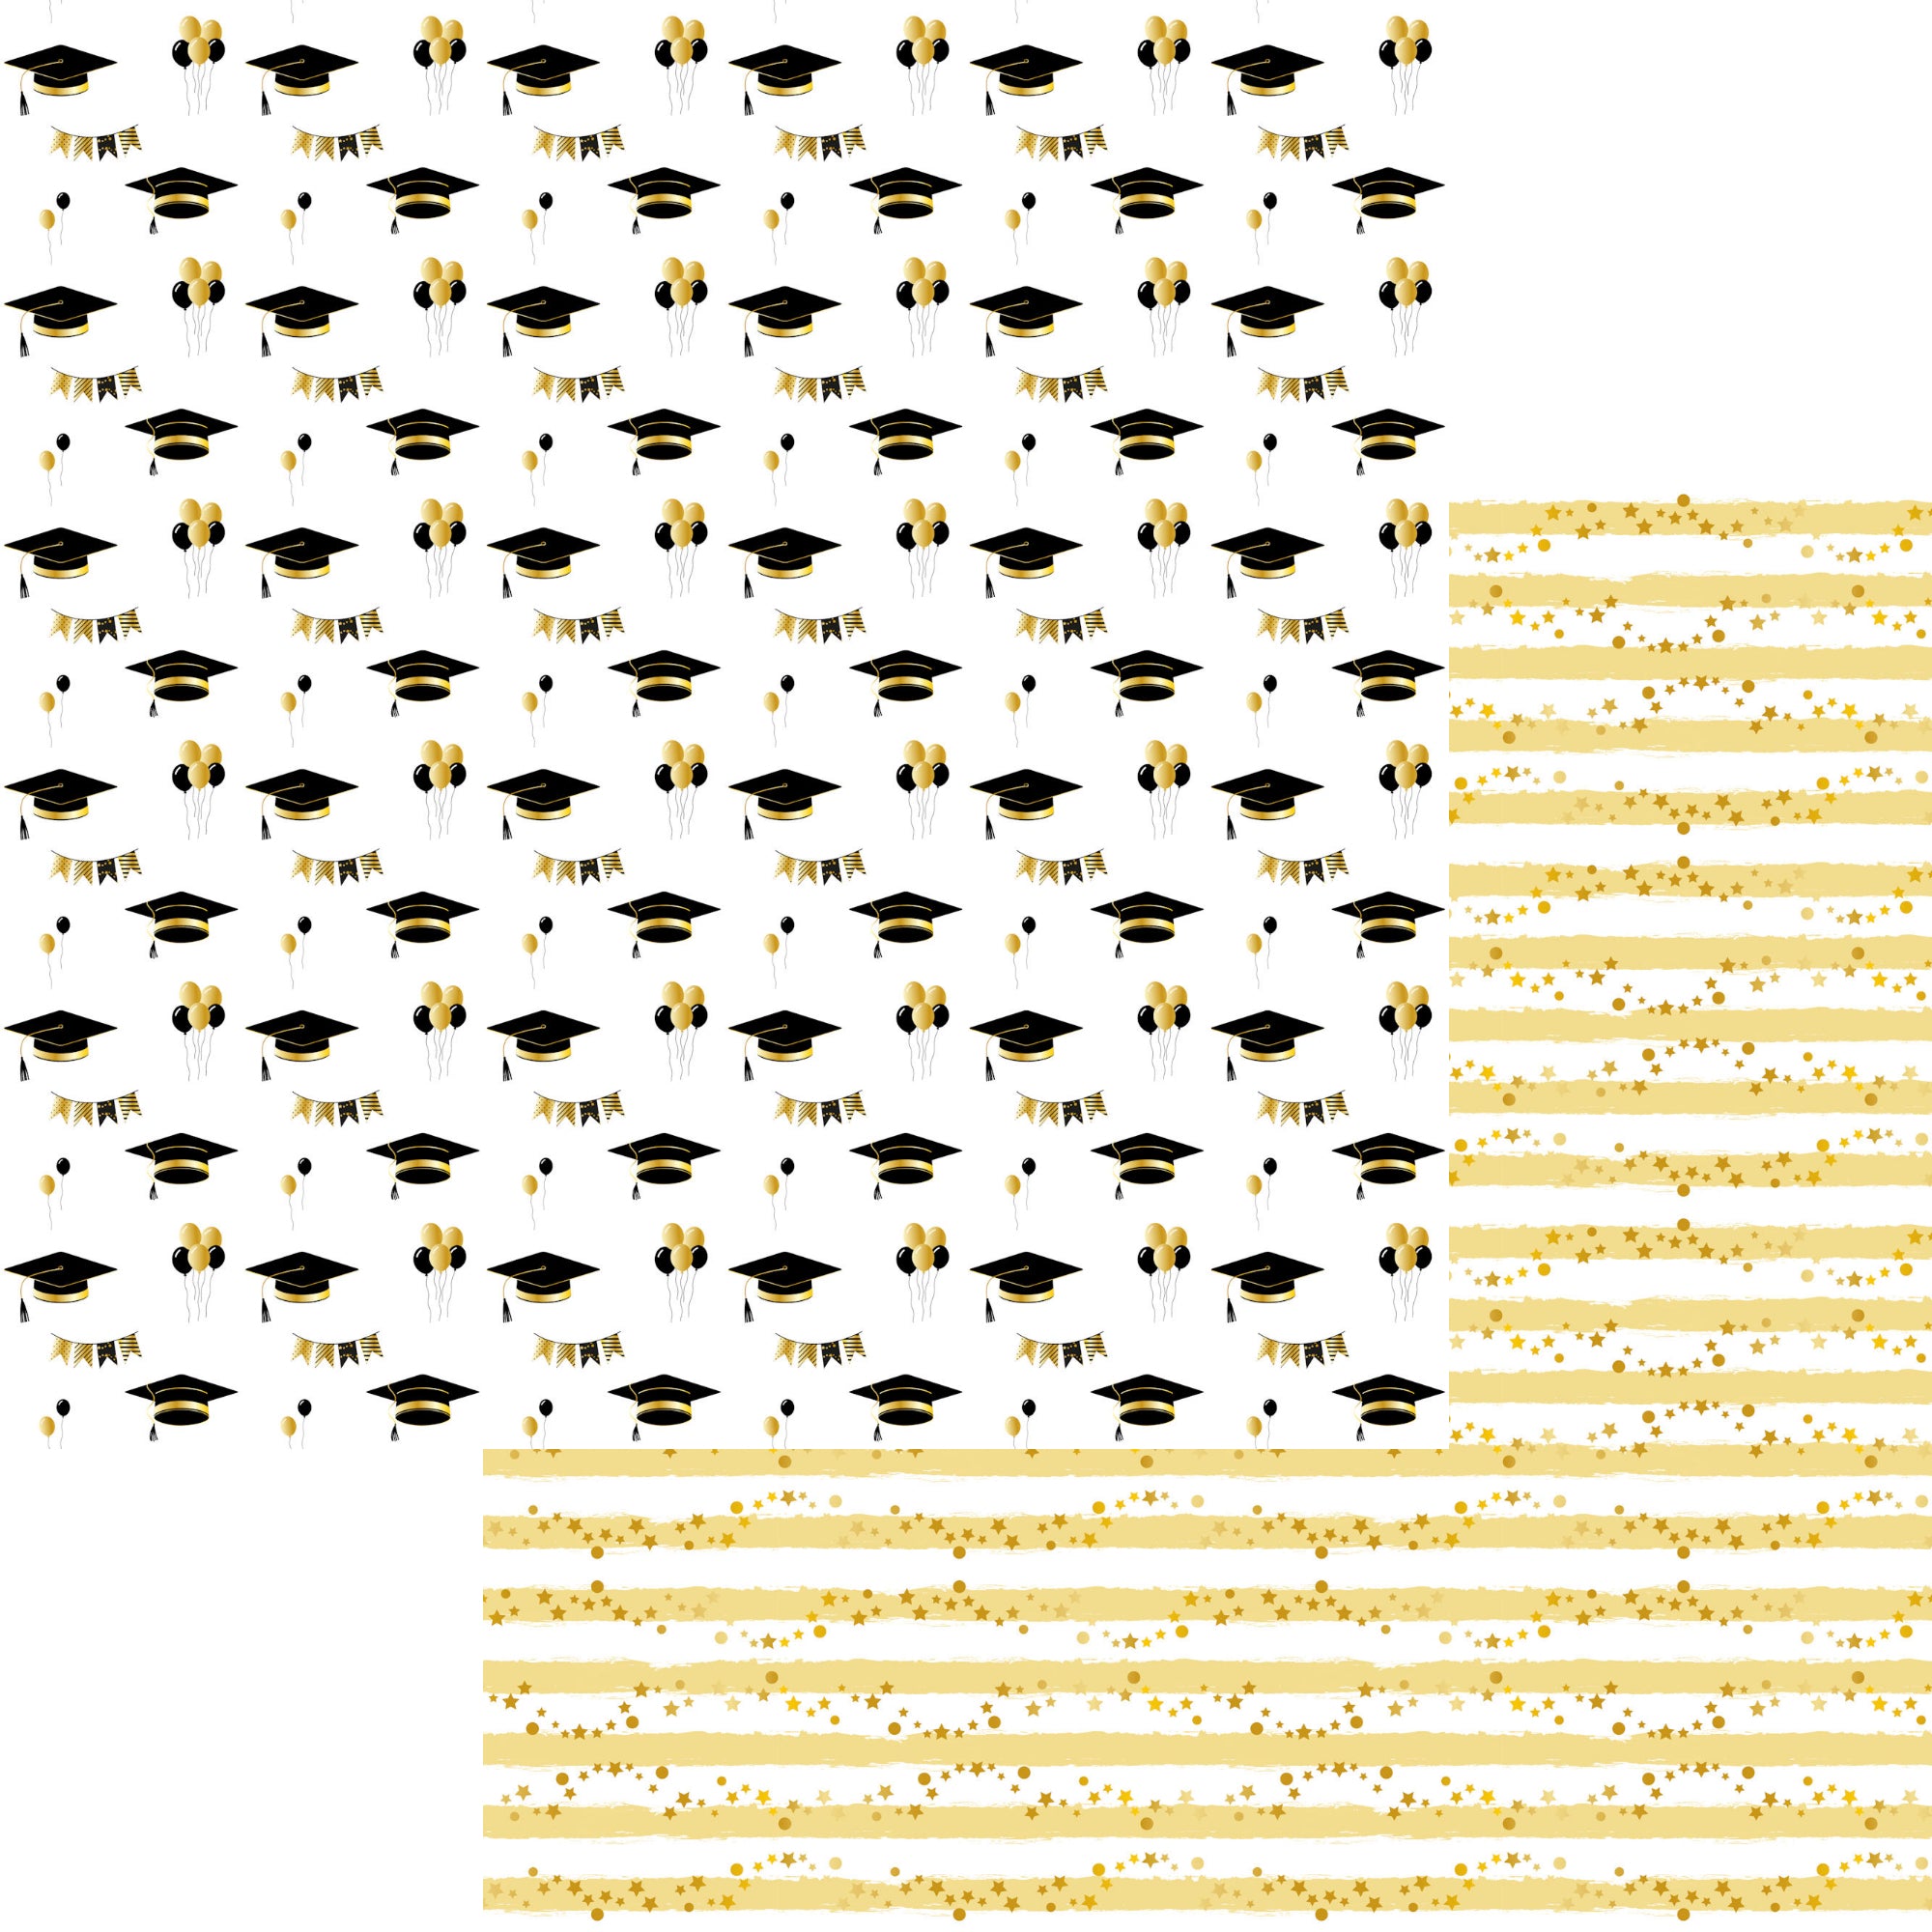 Graduation Collection Congratulations 12 x 12 Double-Sided Scrapbook Paper by SSC Designs